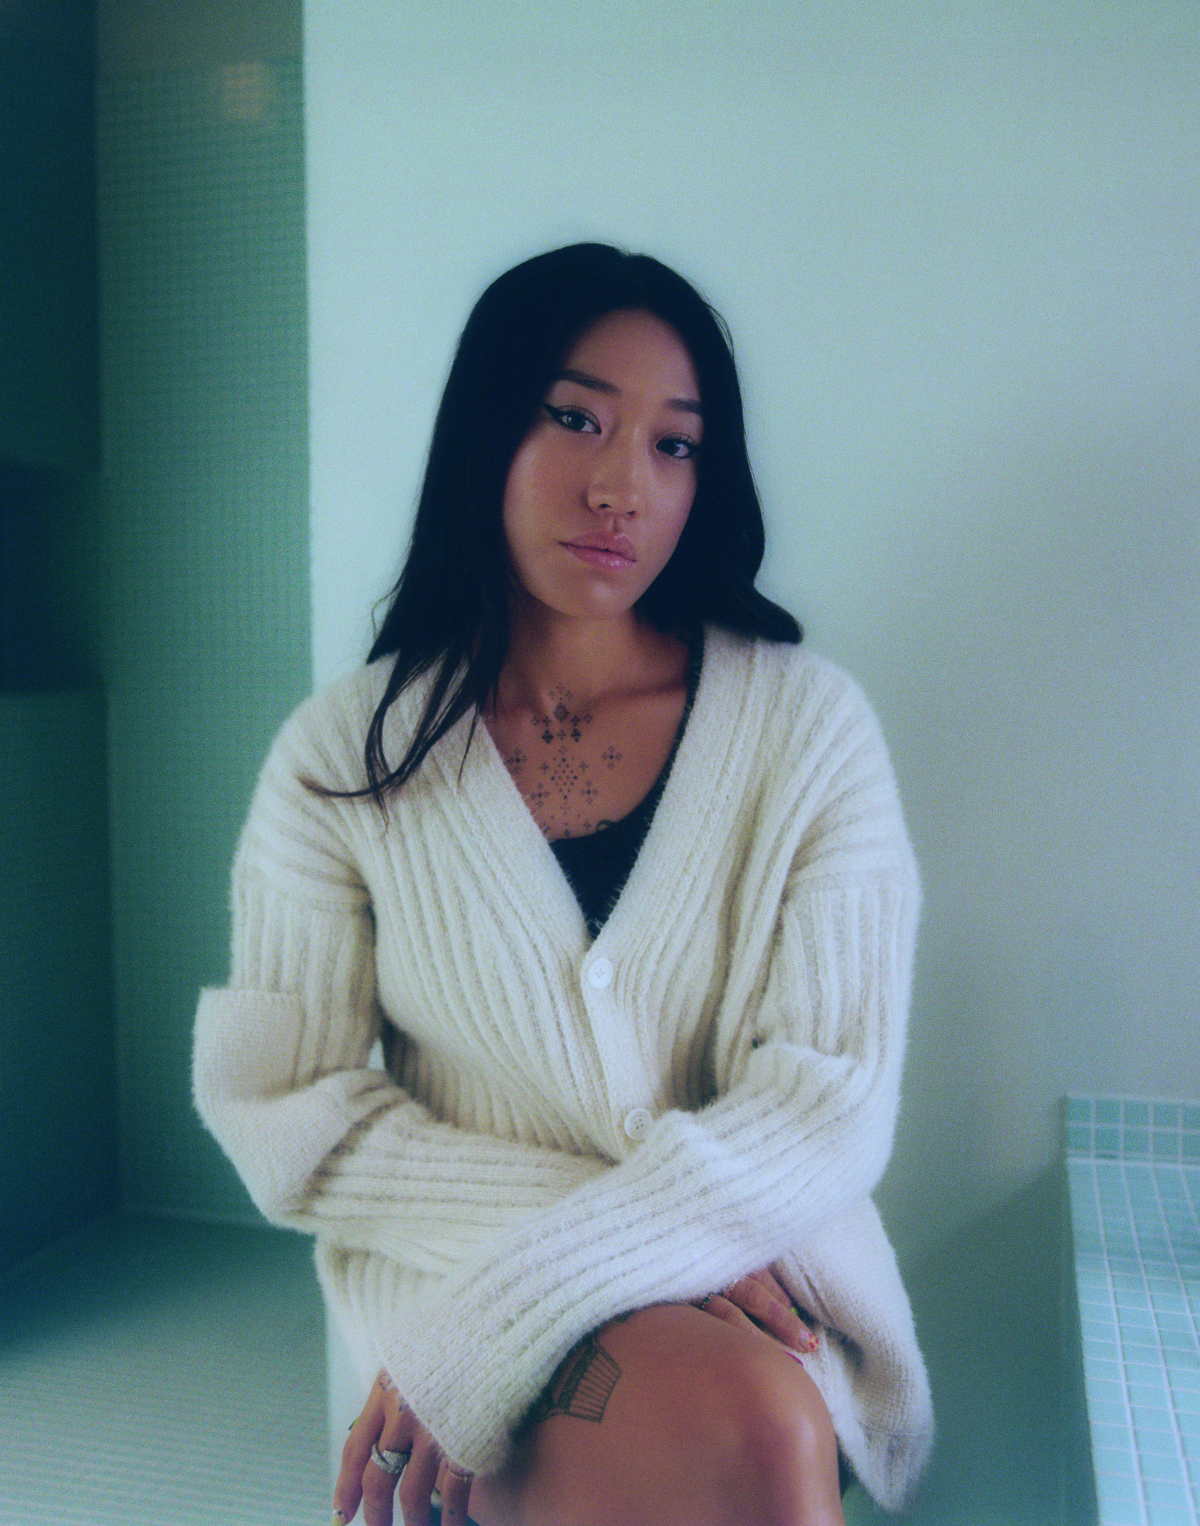 Global icon Peggy Gou for Authentic Beauty Concept